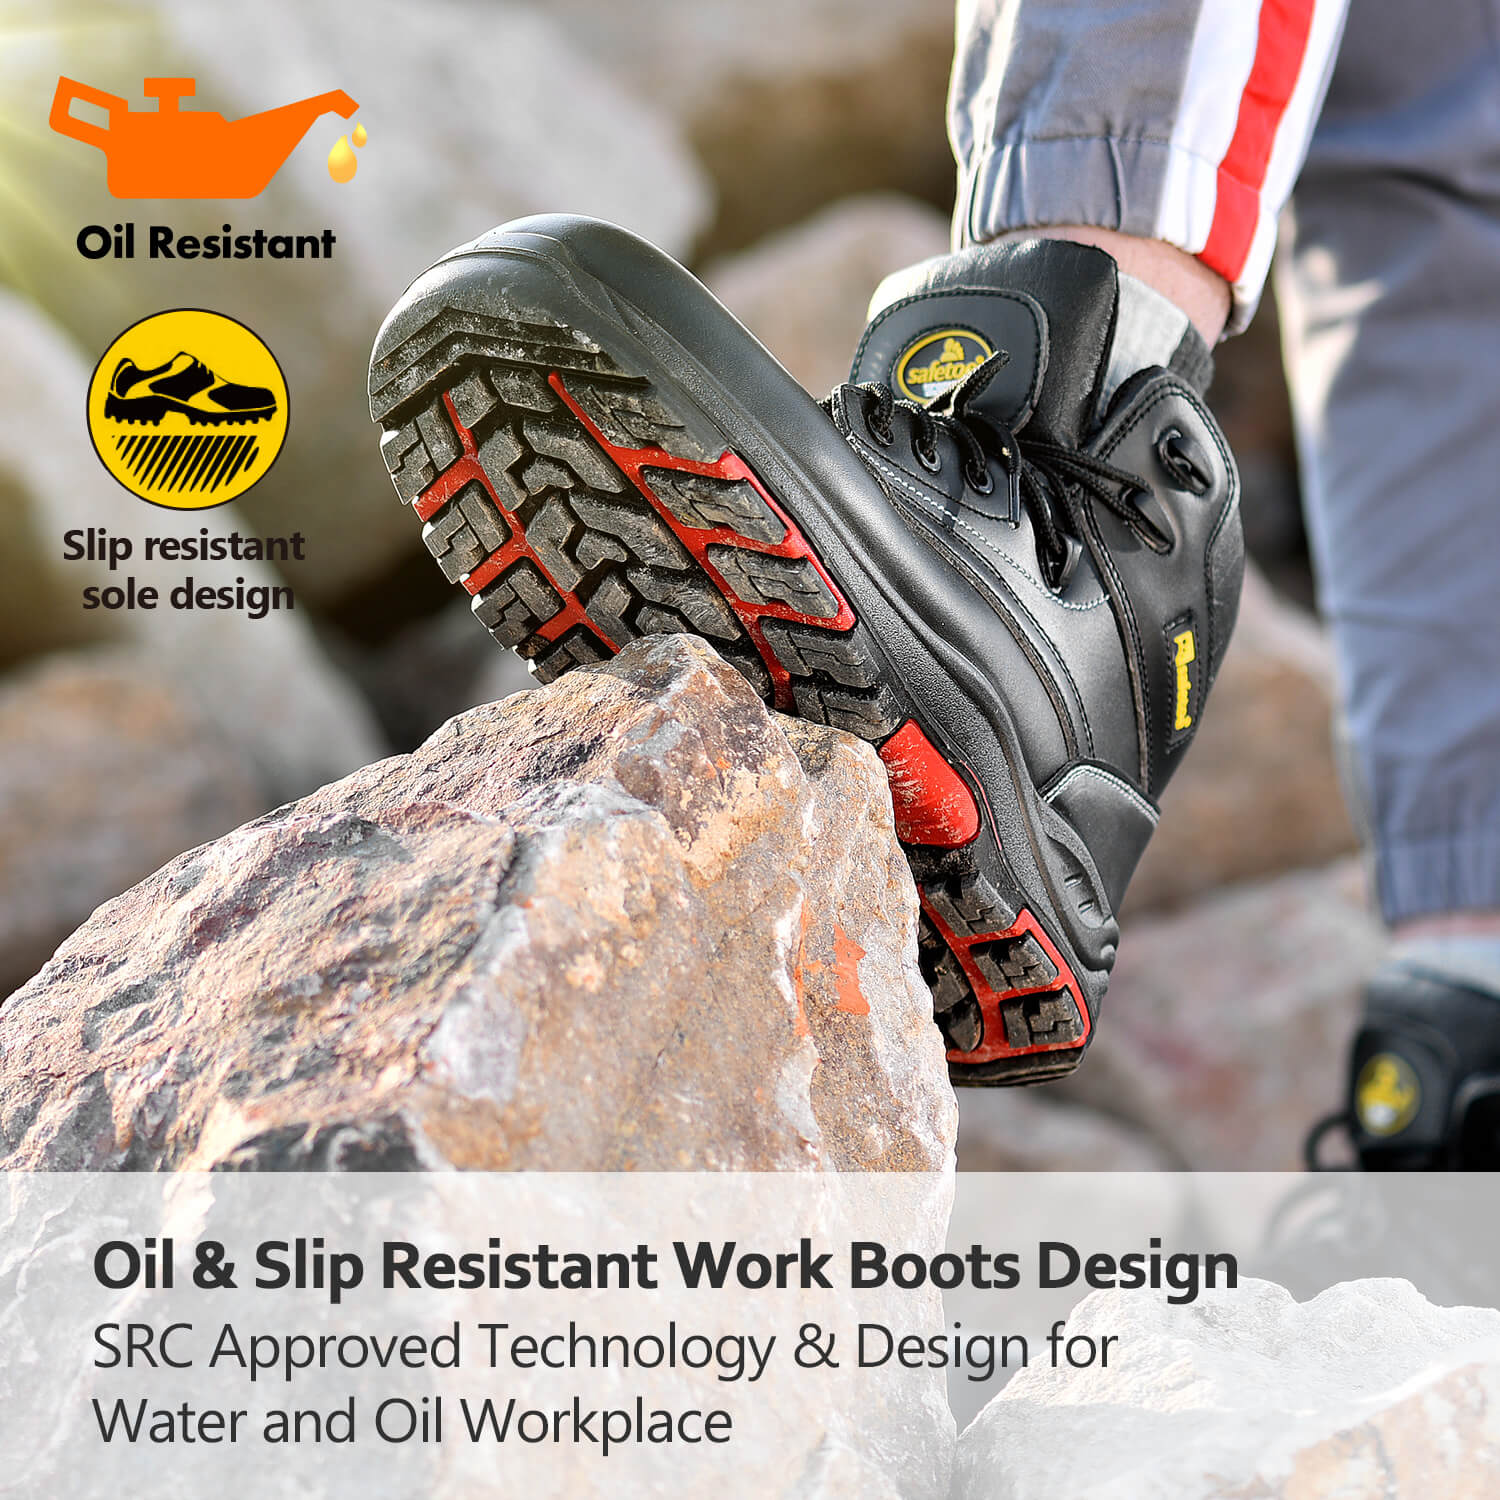 Safetoe Water Resistant Wide Fit Safety Work Boots